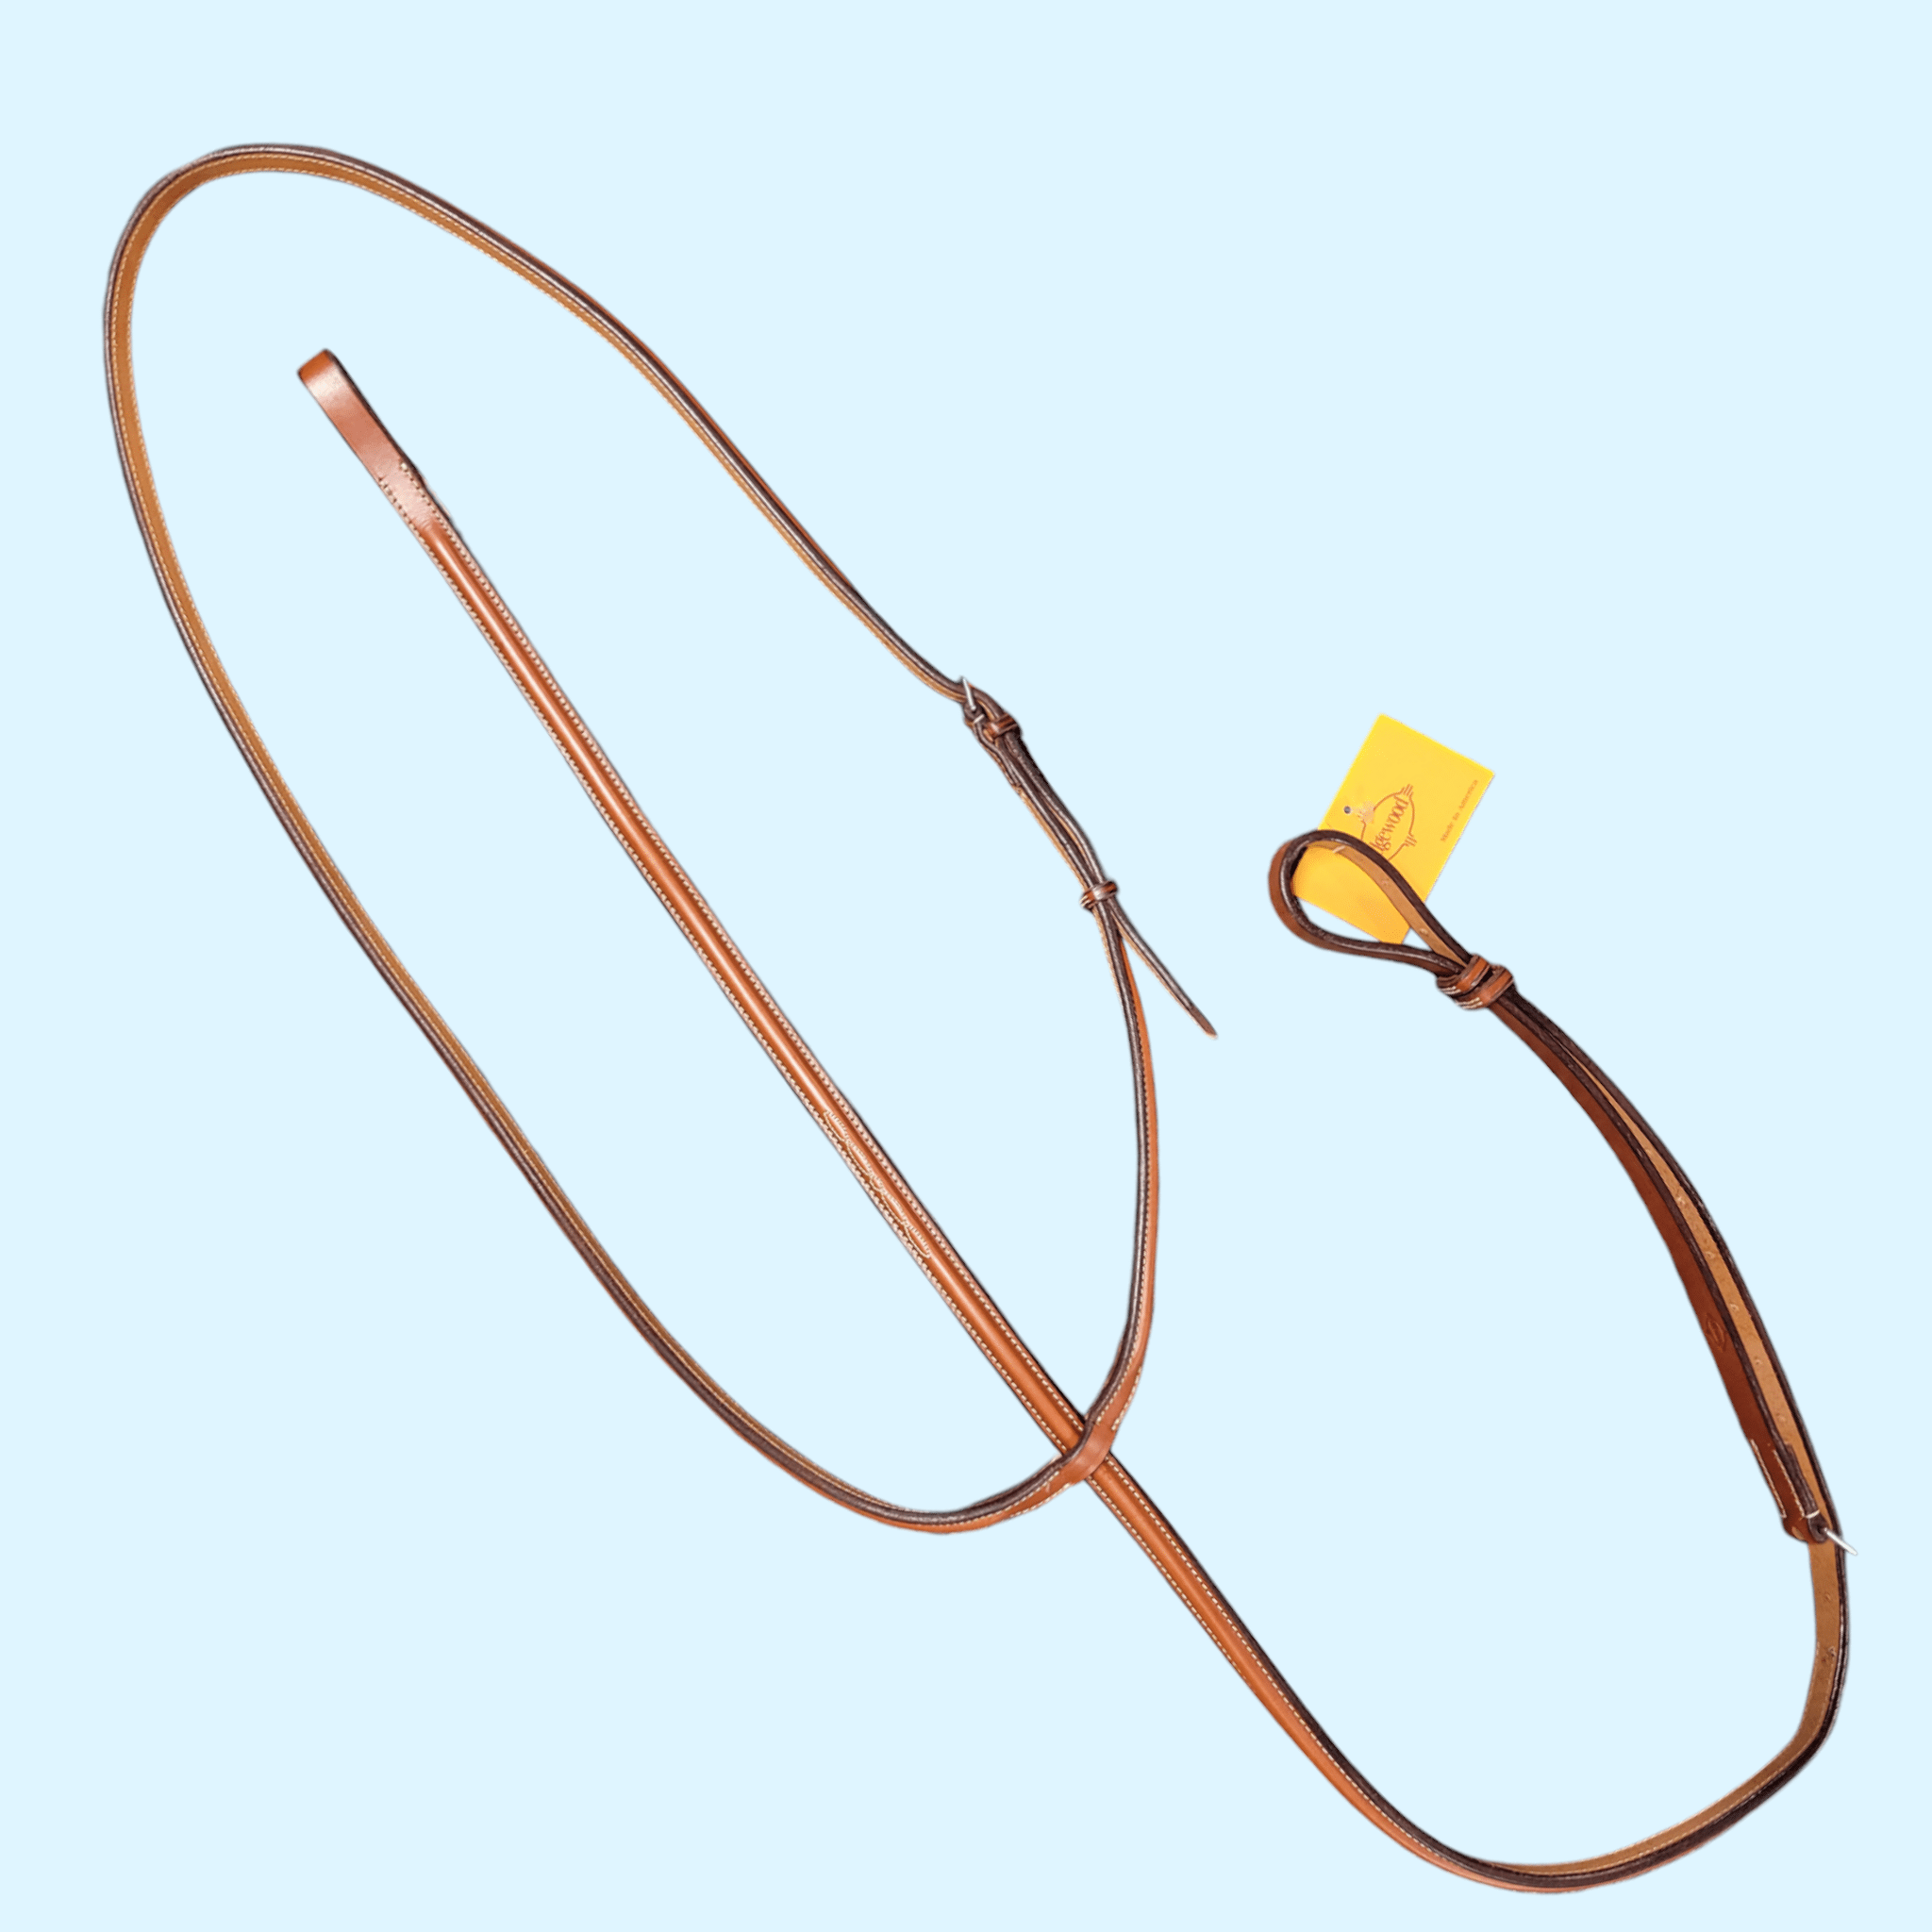 Edgewood Raised Fancy Stitch Standing Martingale in Chestnut - Oversize - Equine Exchange Tack Shop